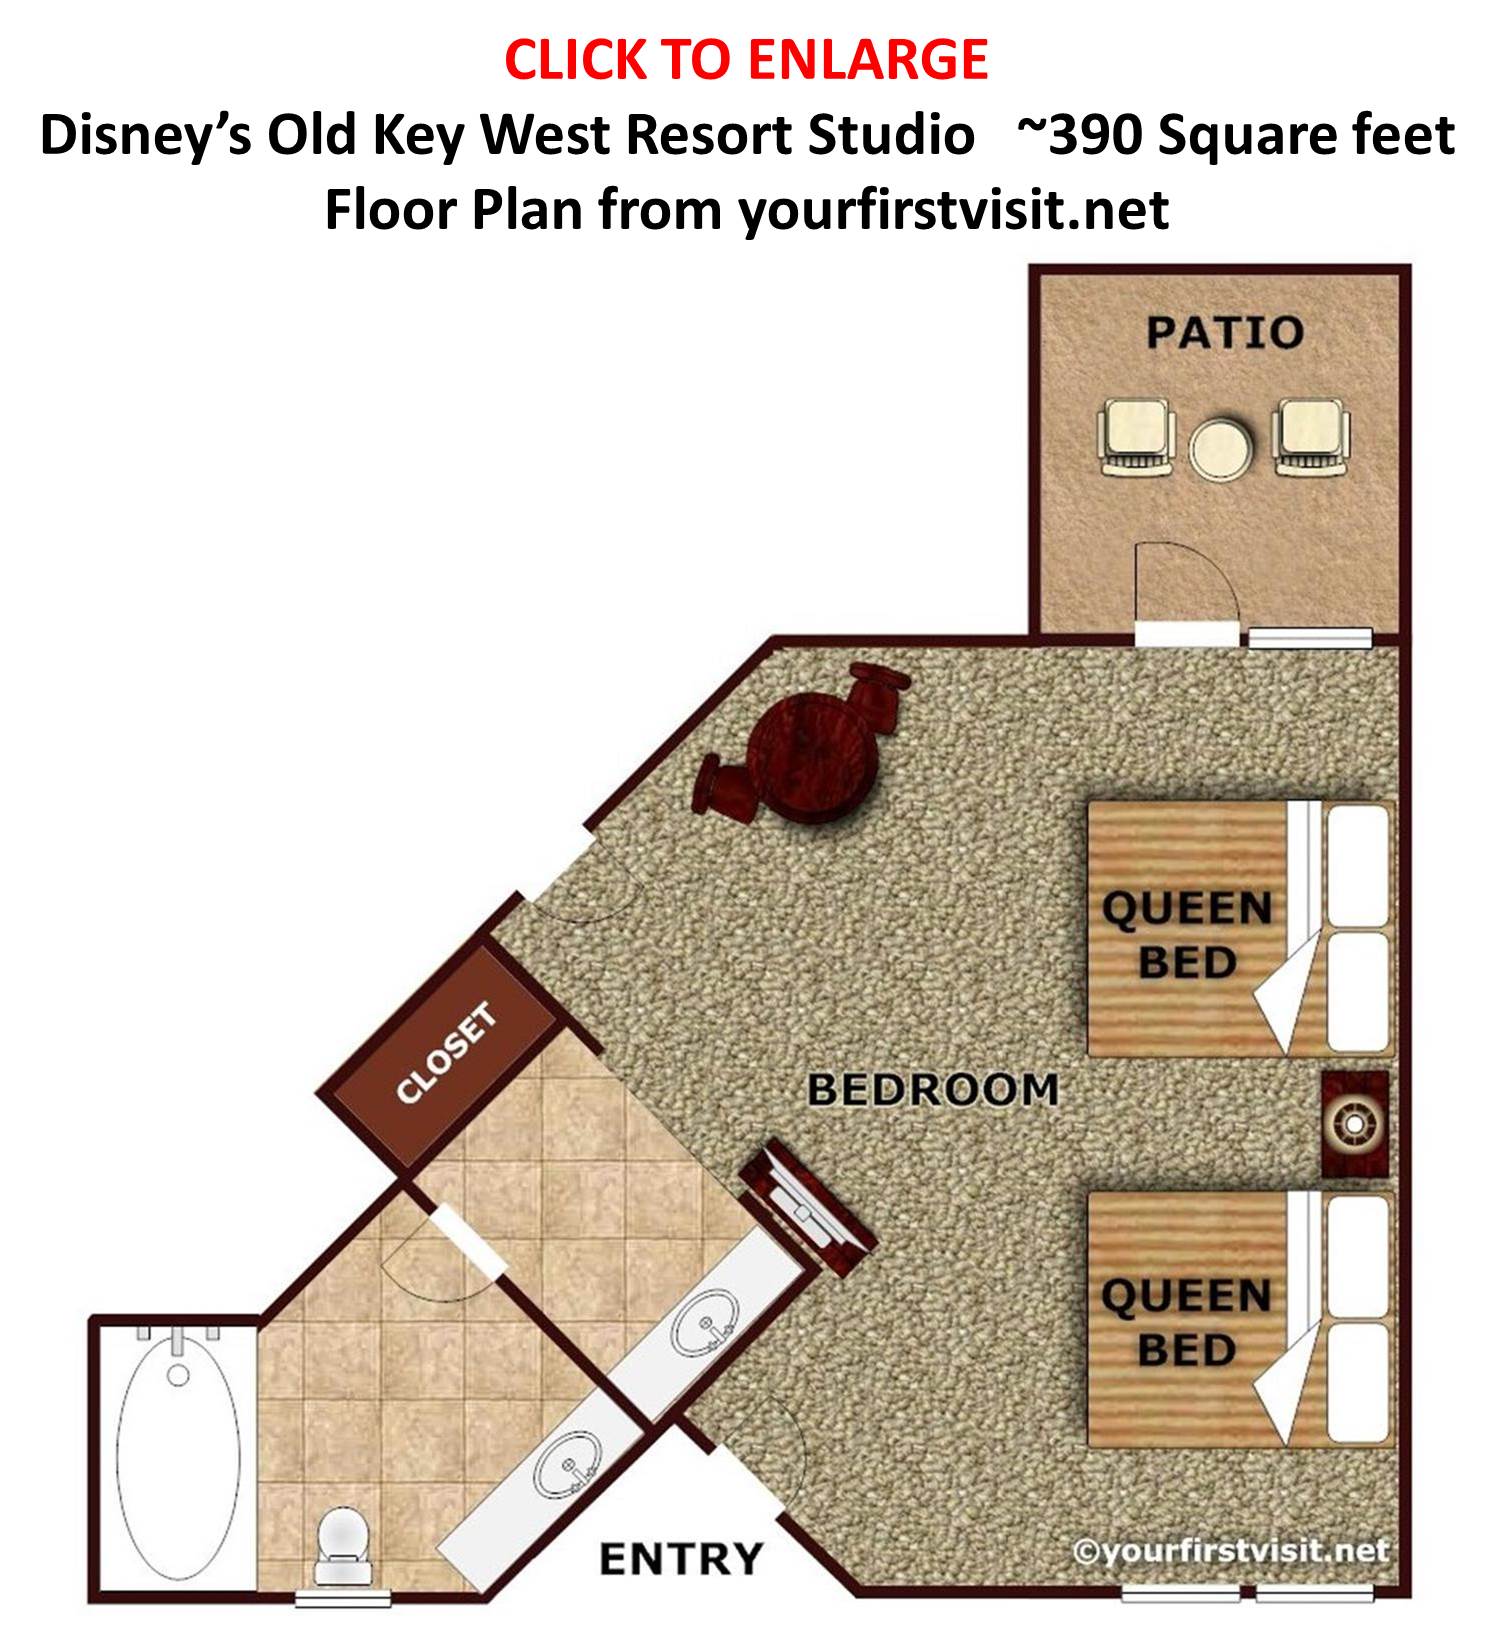 Overview of at Disney's Old Key West Resort